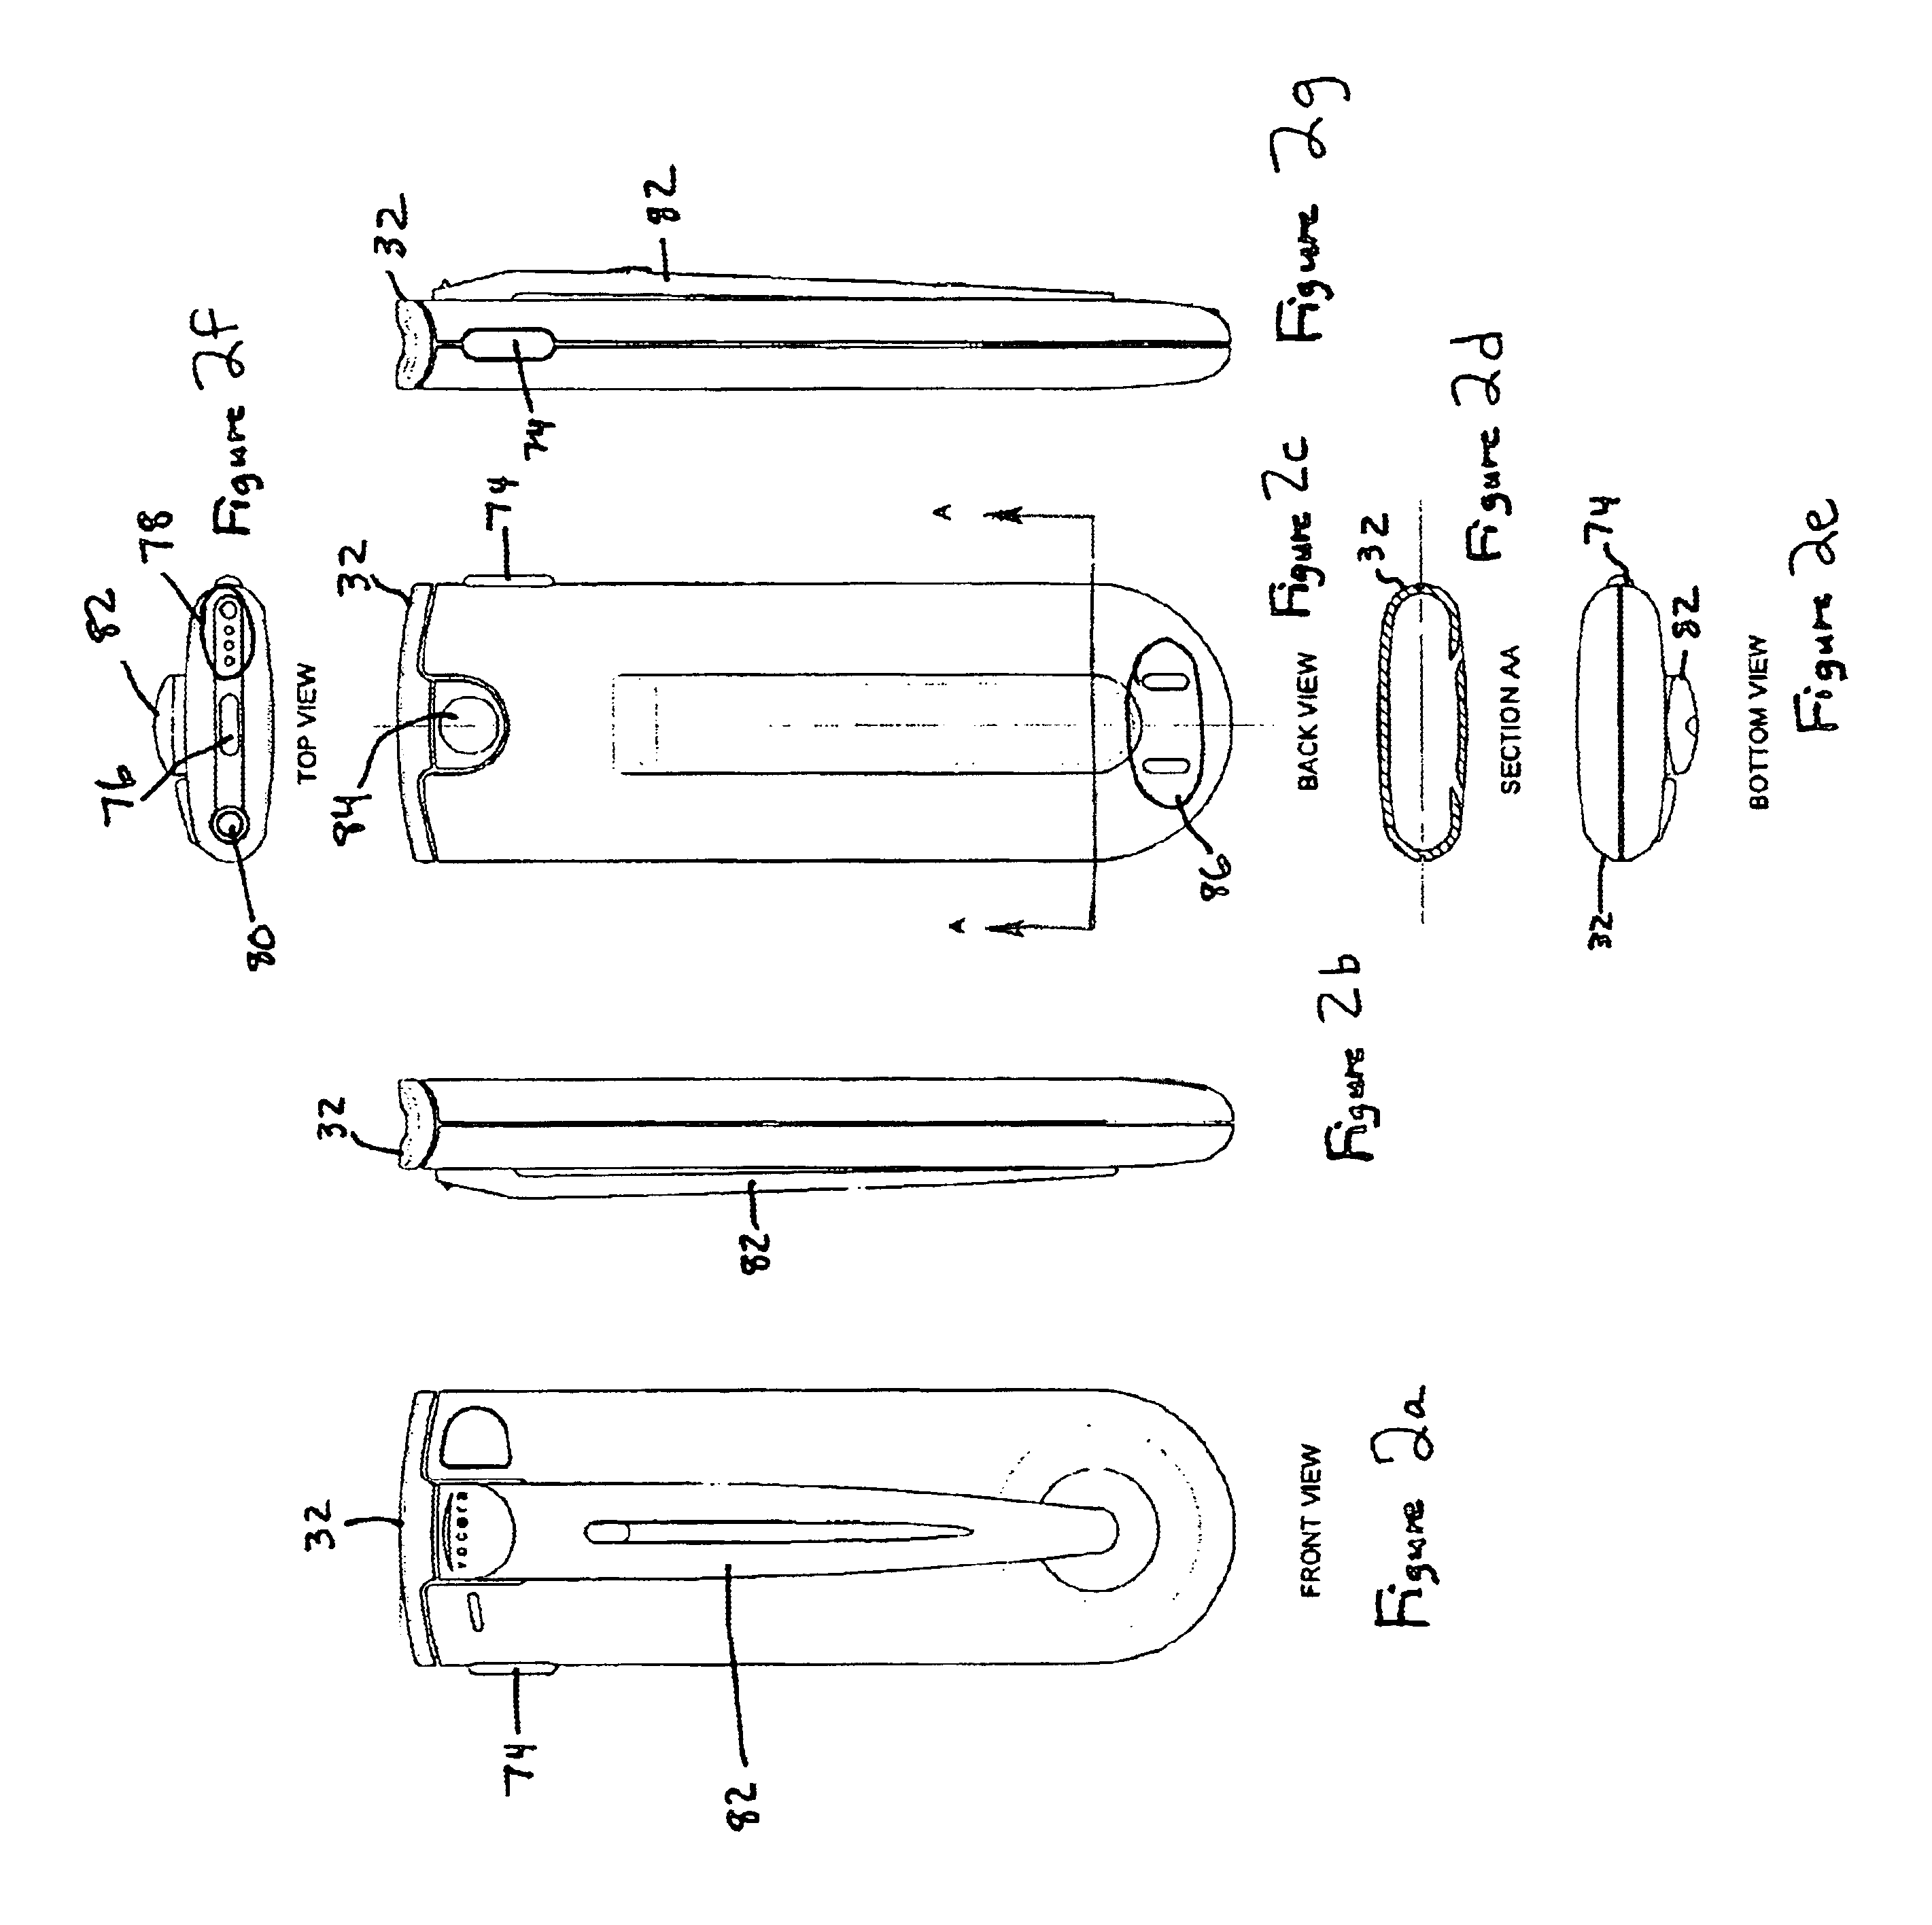 Voice-controlled wireless communications system and method